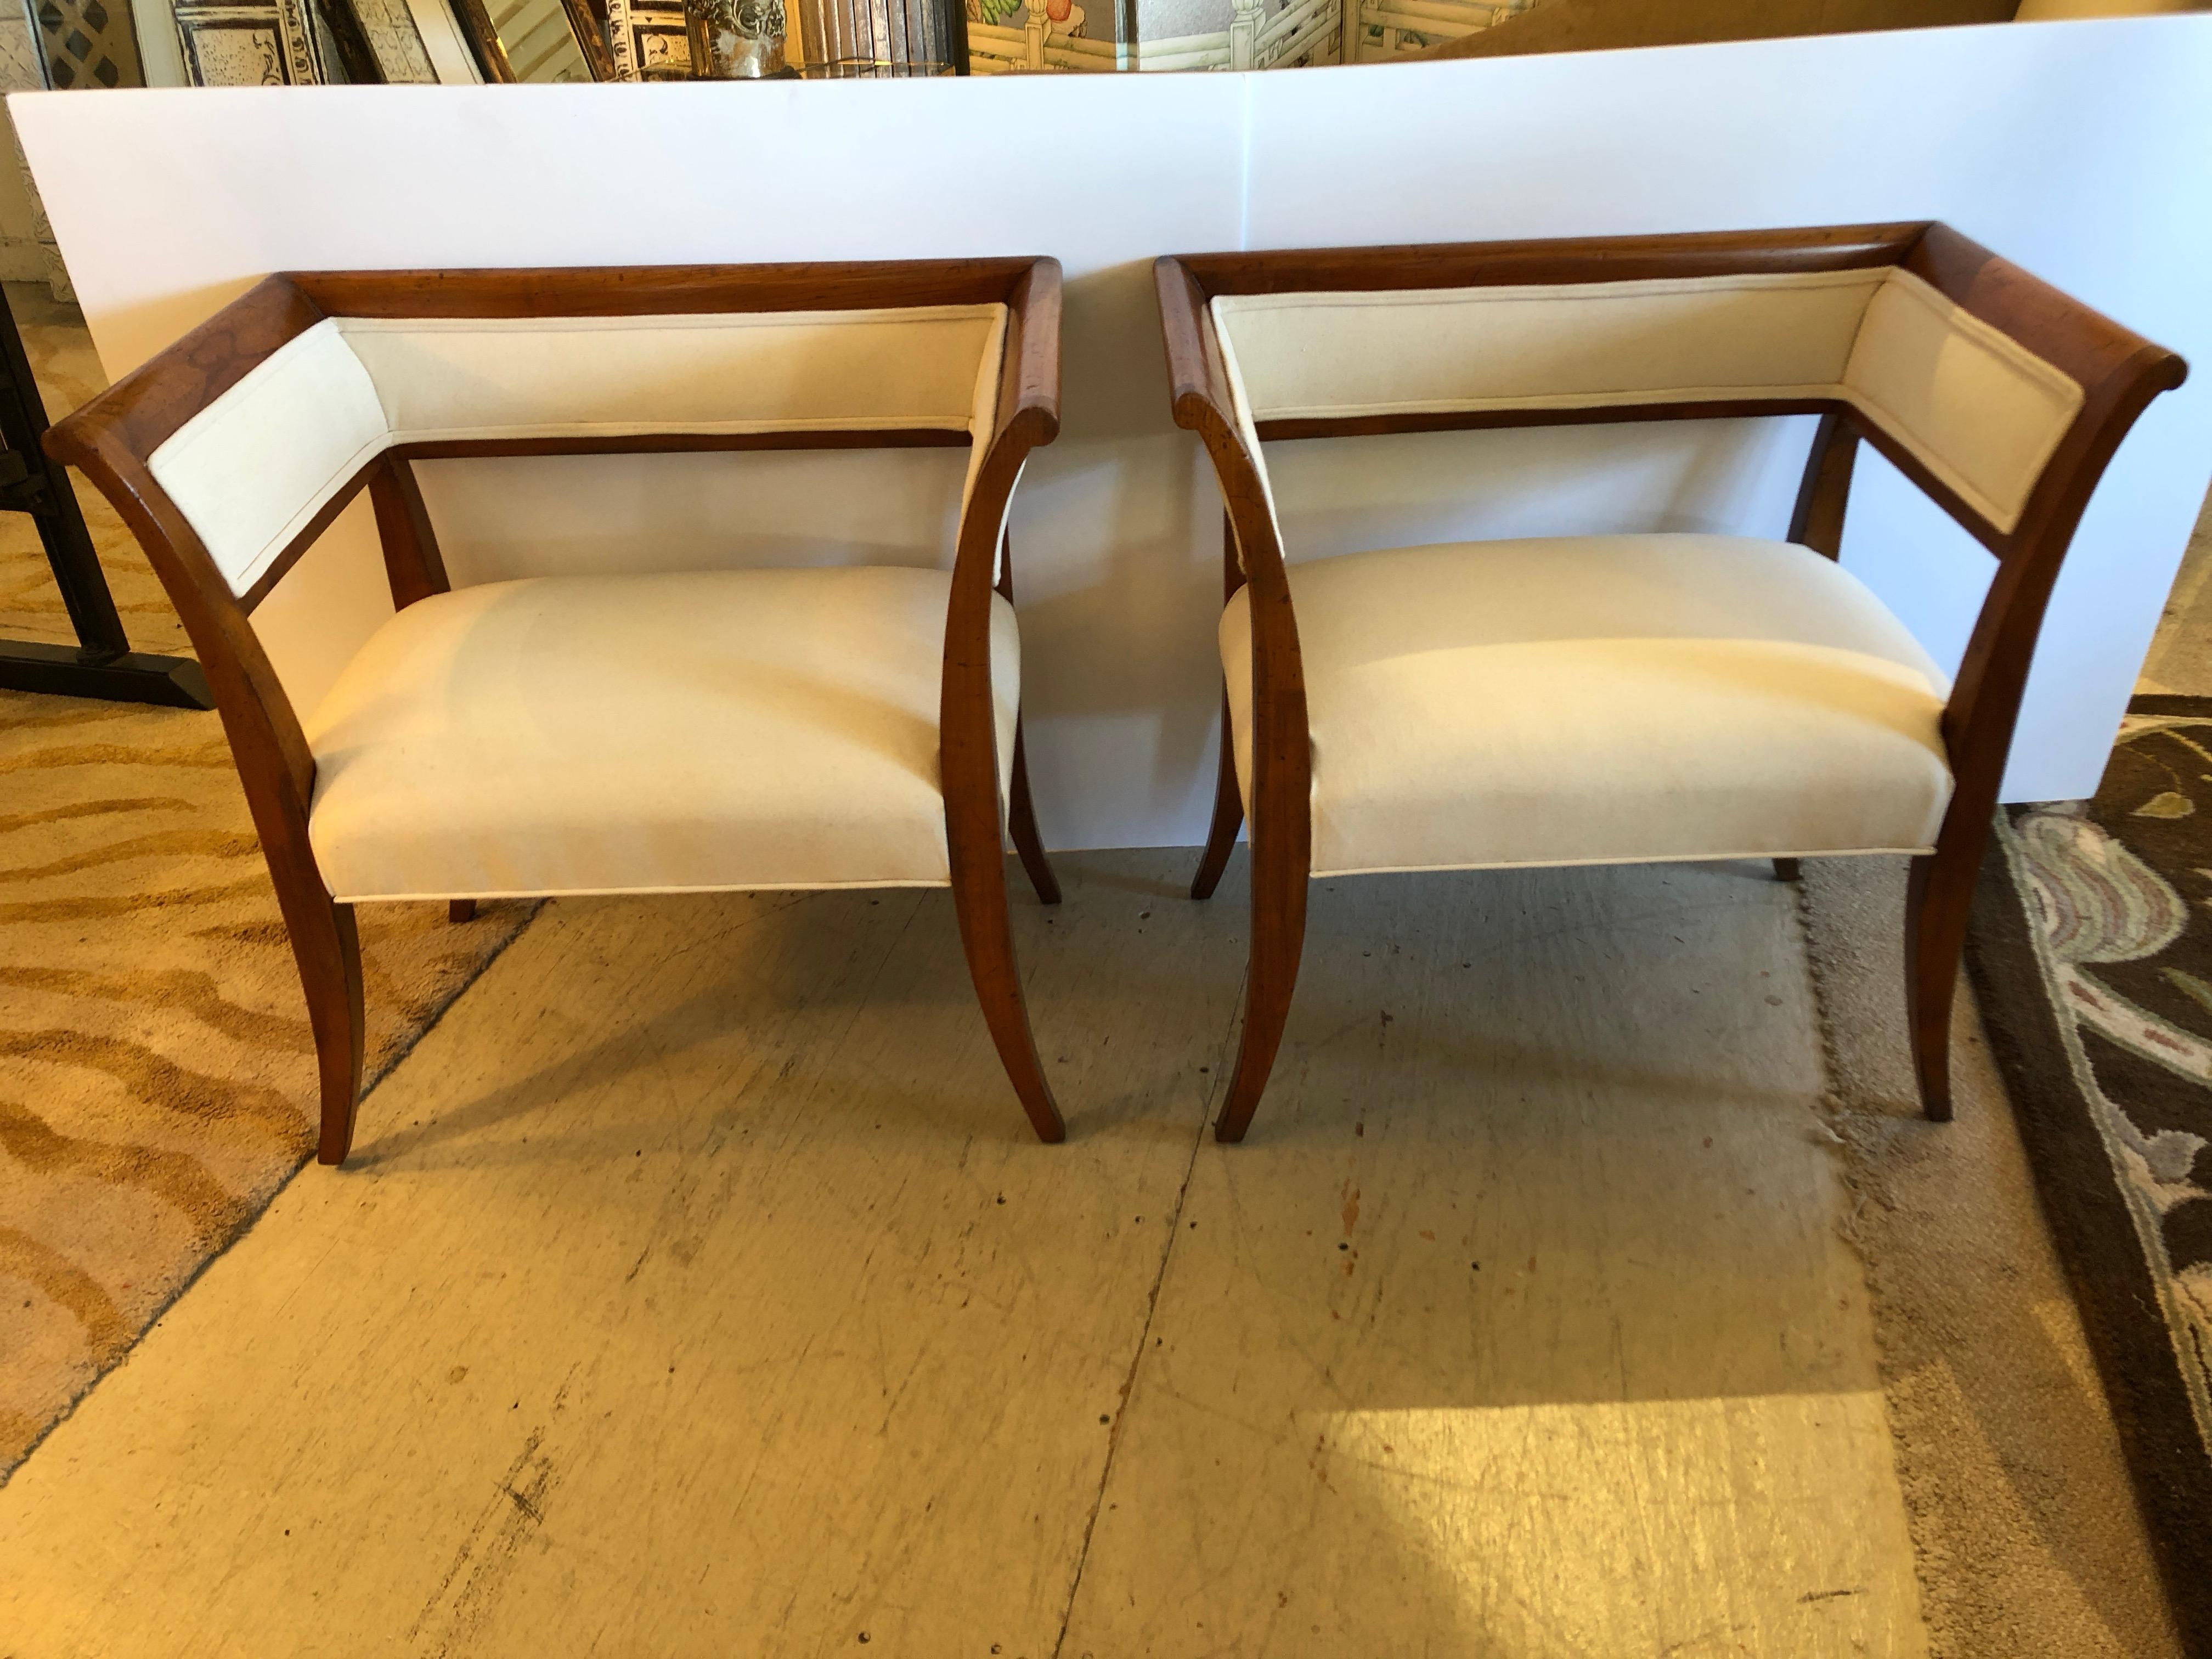 Super chic pair of Directoire style chairs or benches having fruitwood frames with elegant splayed legs and square backs, newly upholstered in heavy white cotton duck.